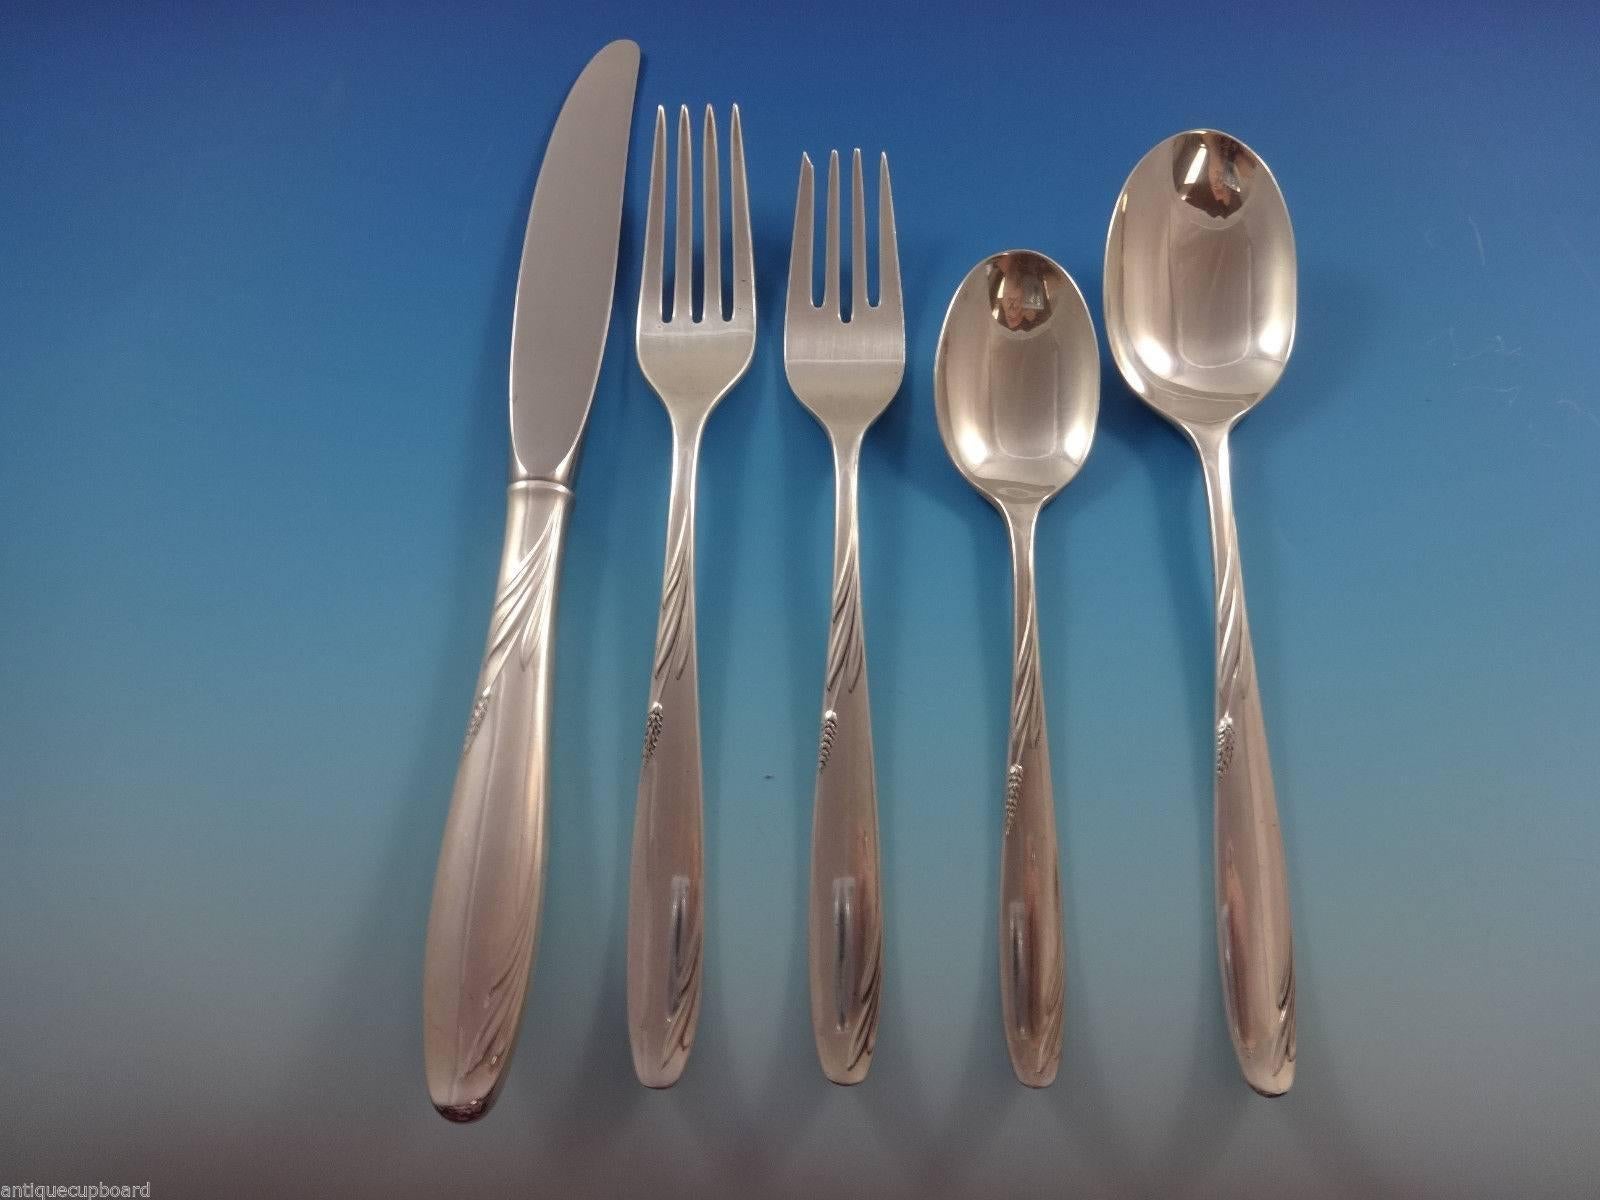 Willow by Gorham sterling silver flatware set, 43 pieces. This set includes:

Eight knives, 9 1/4